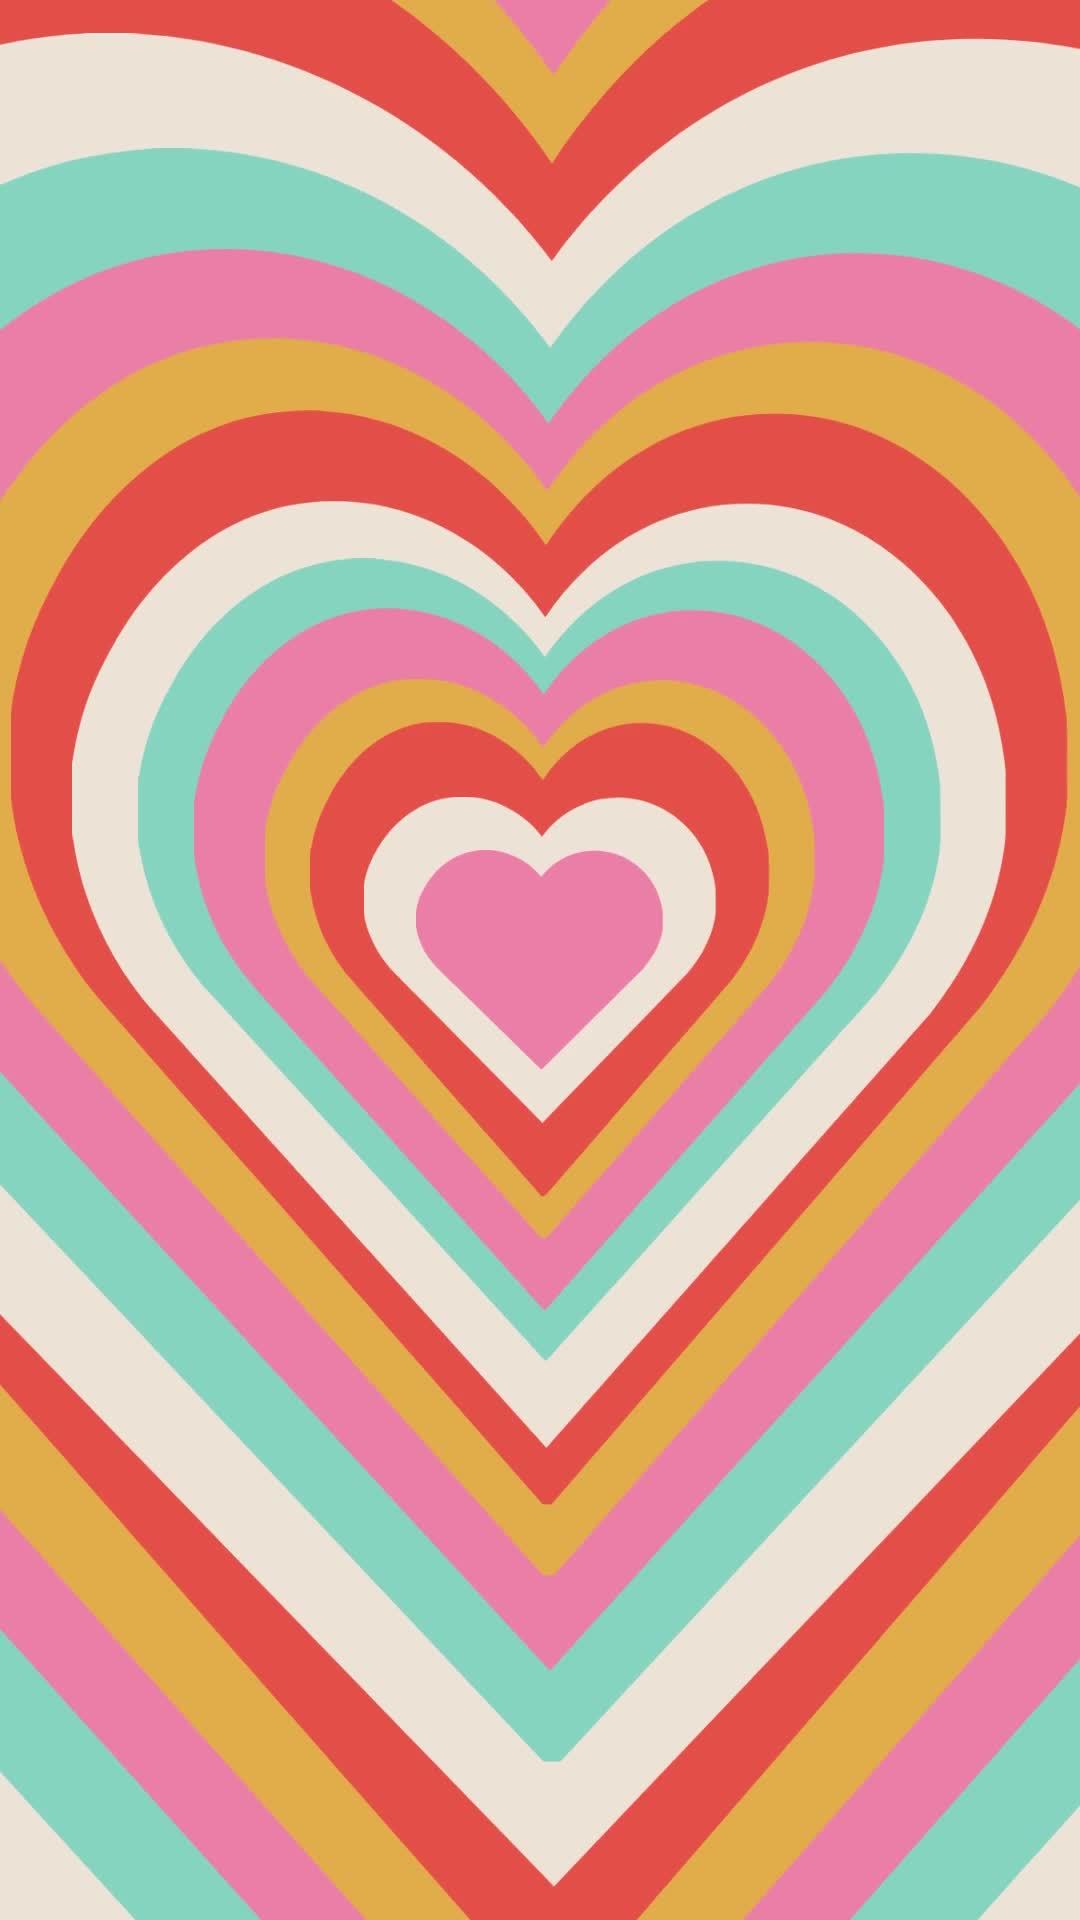 Retro groovy playful heart wallpaper background animated vertical video ...